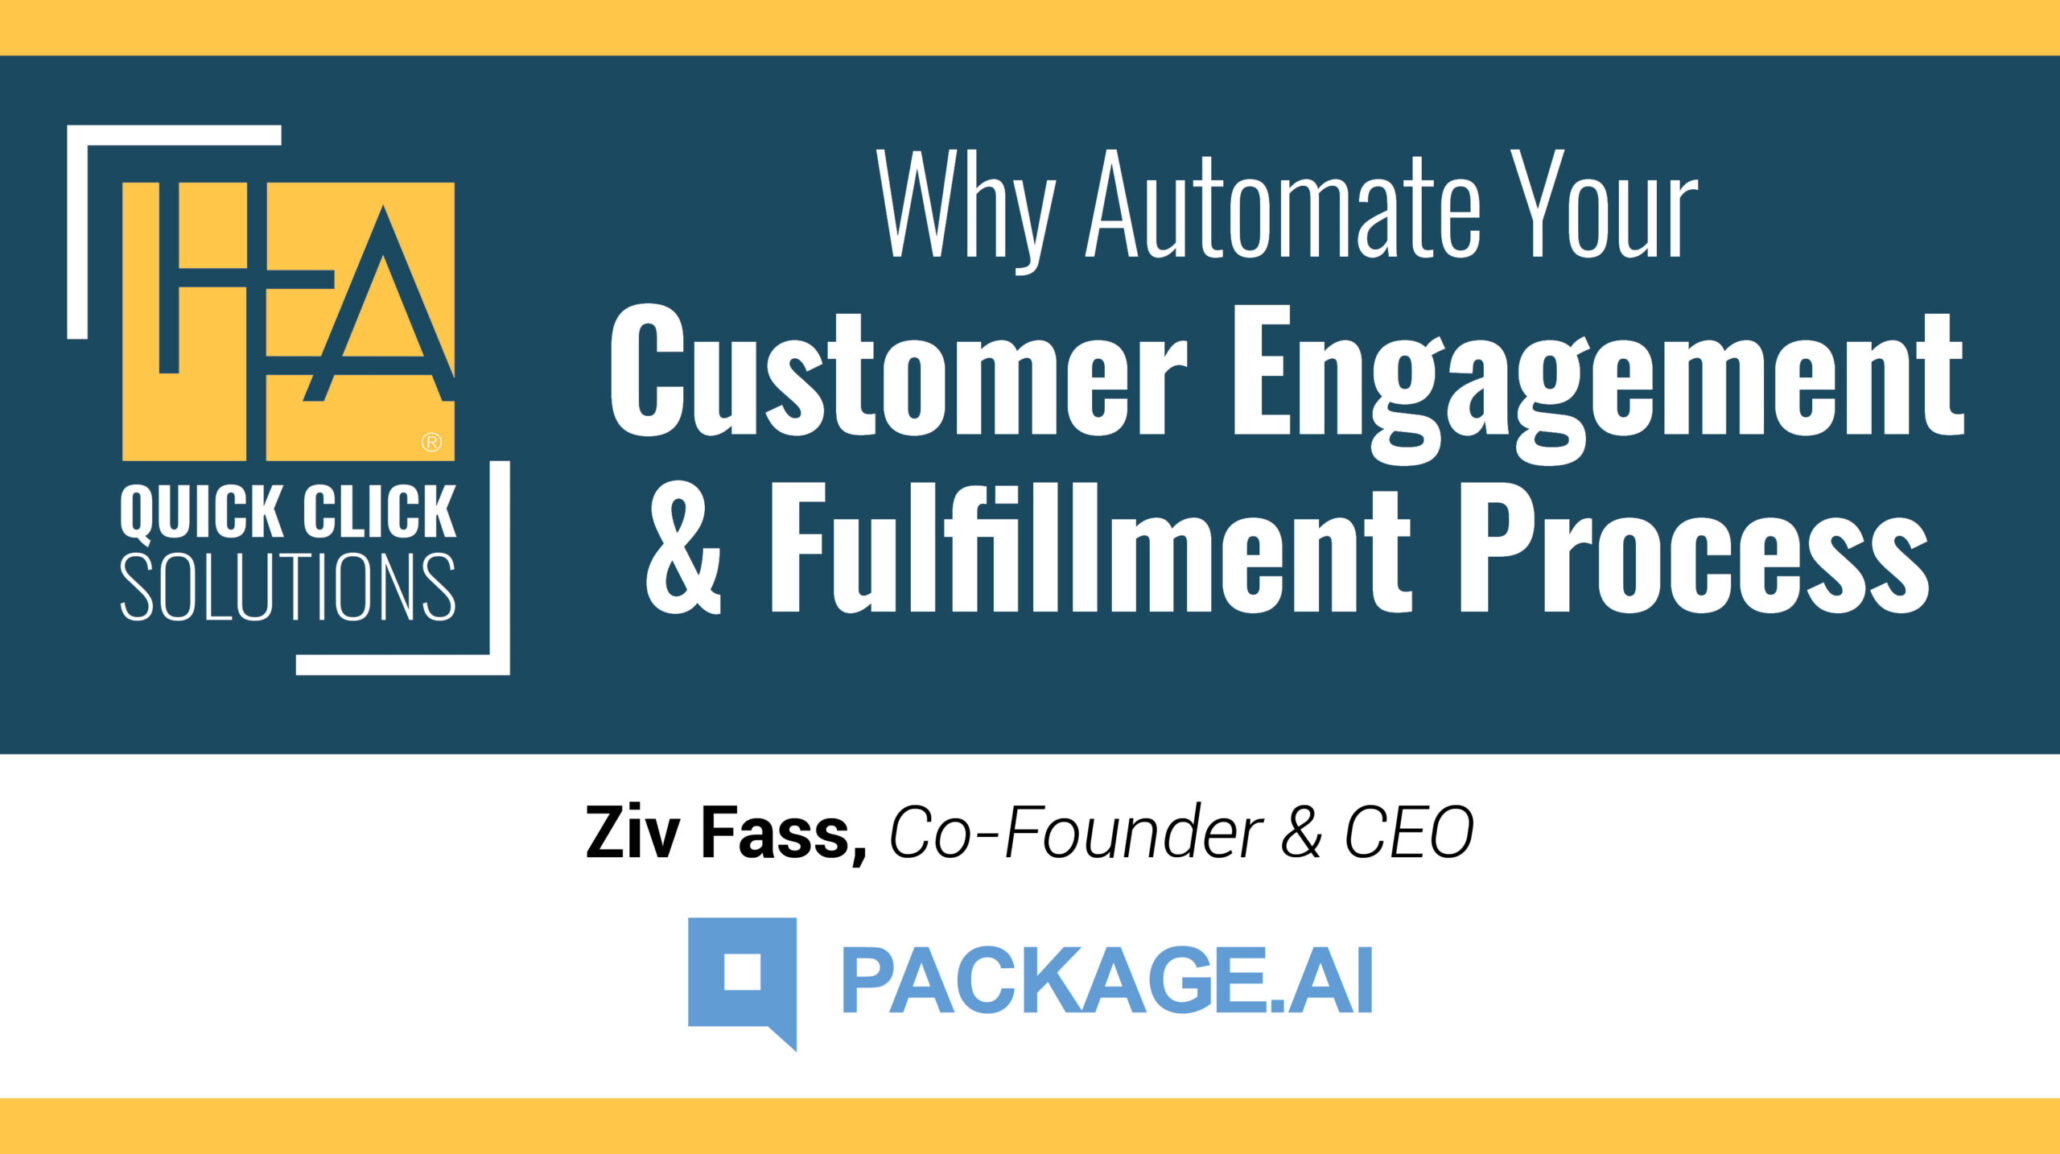 HFA_QCS-Why Automate Your Customer Engagement